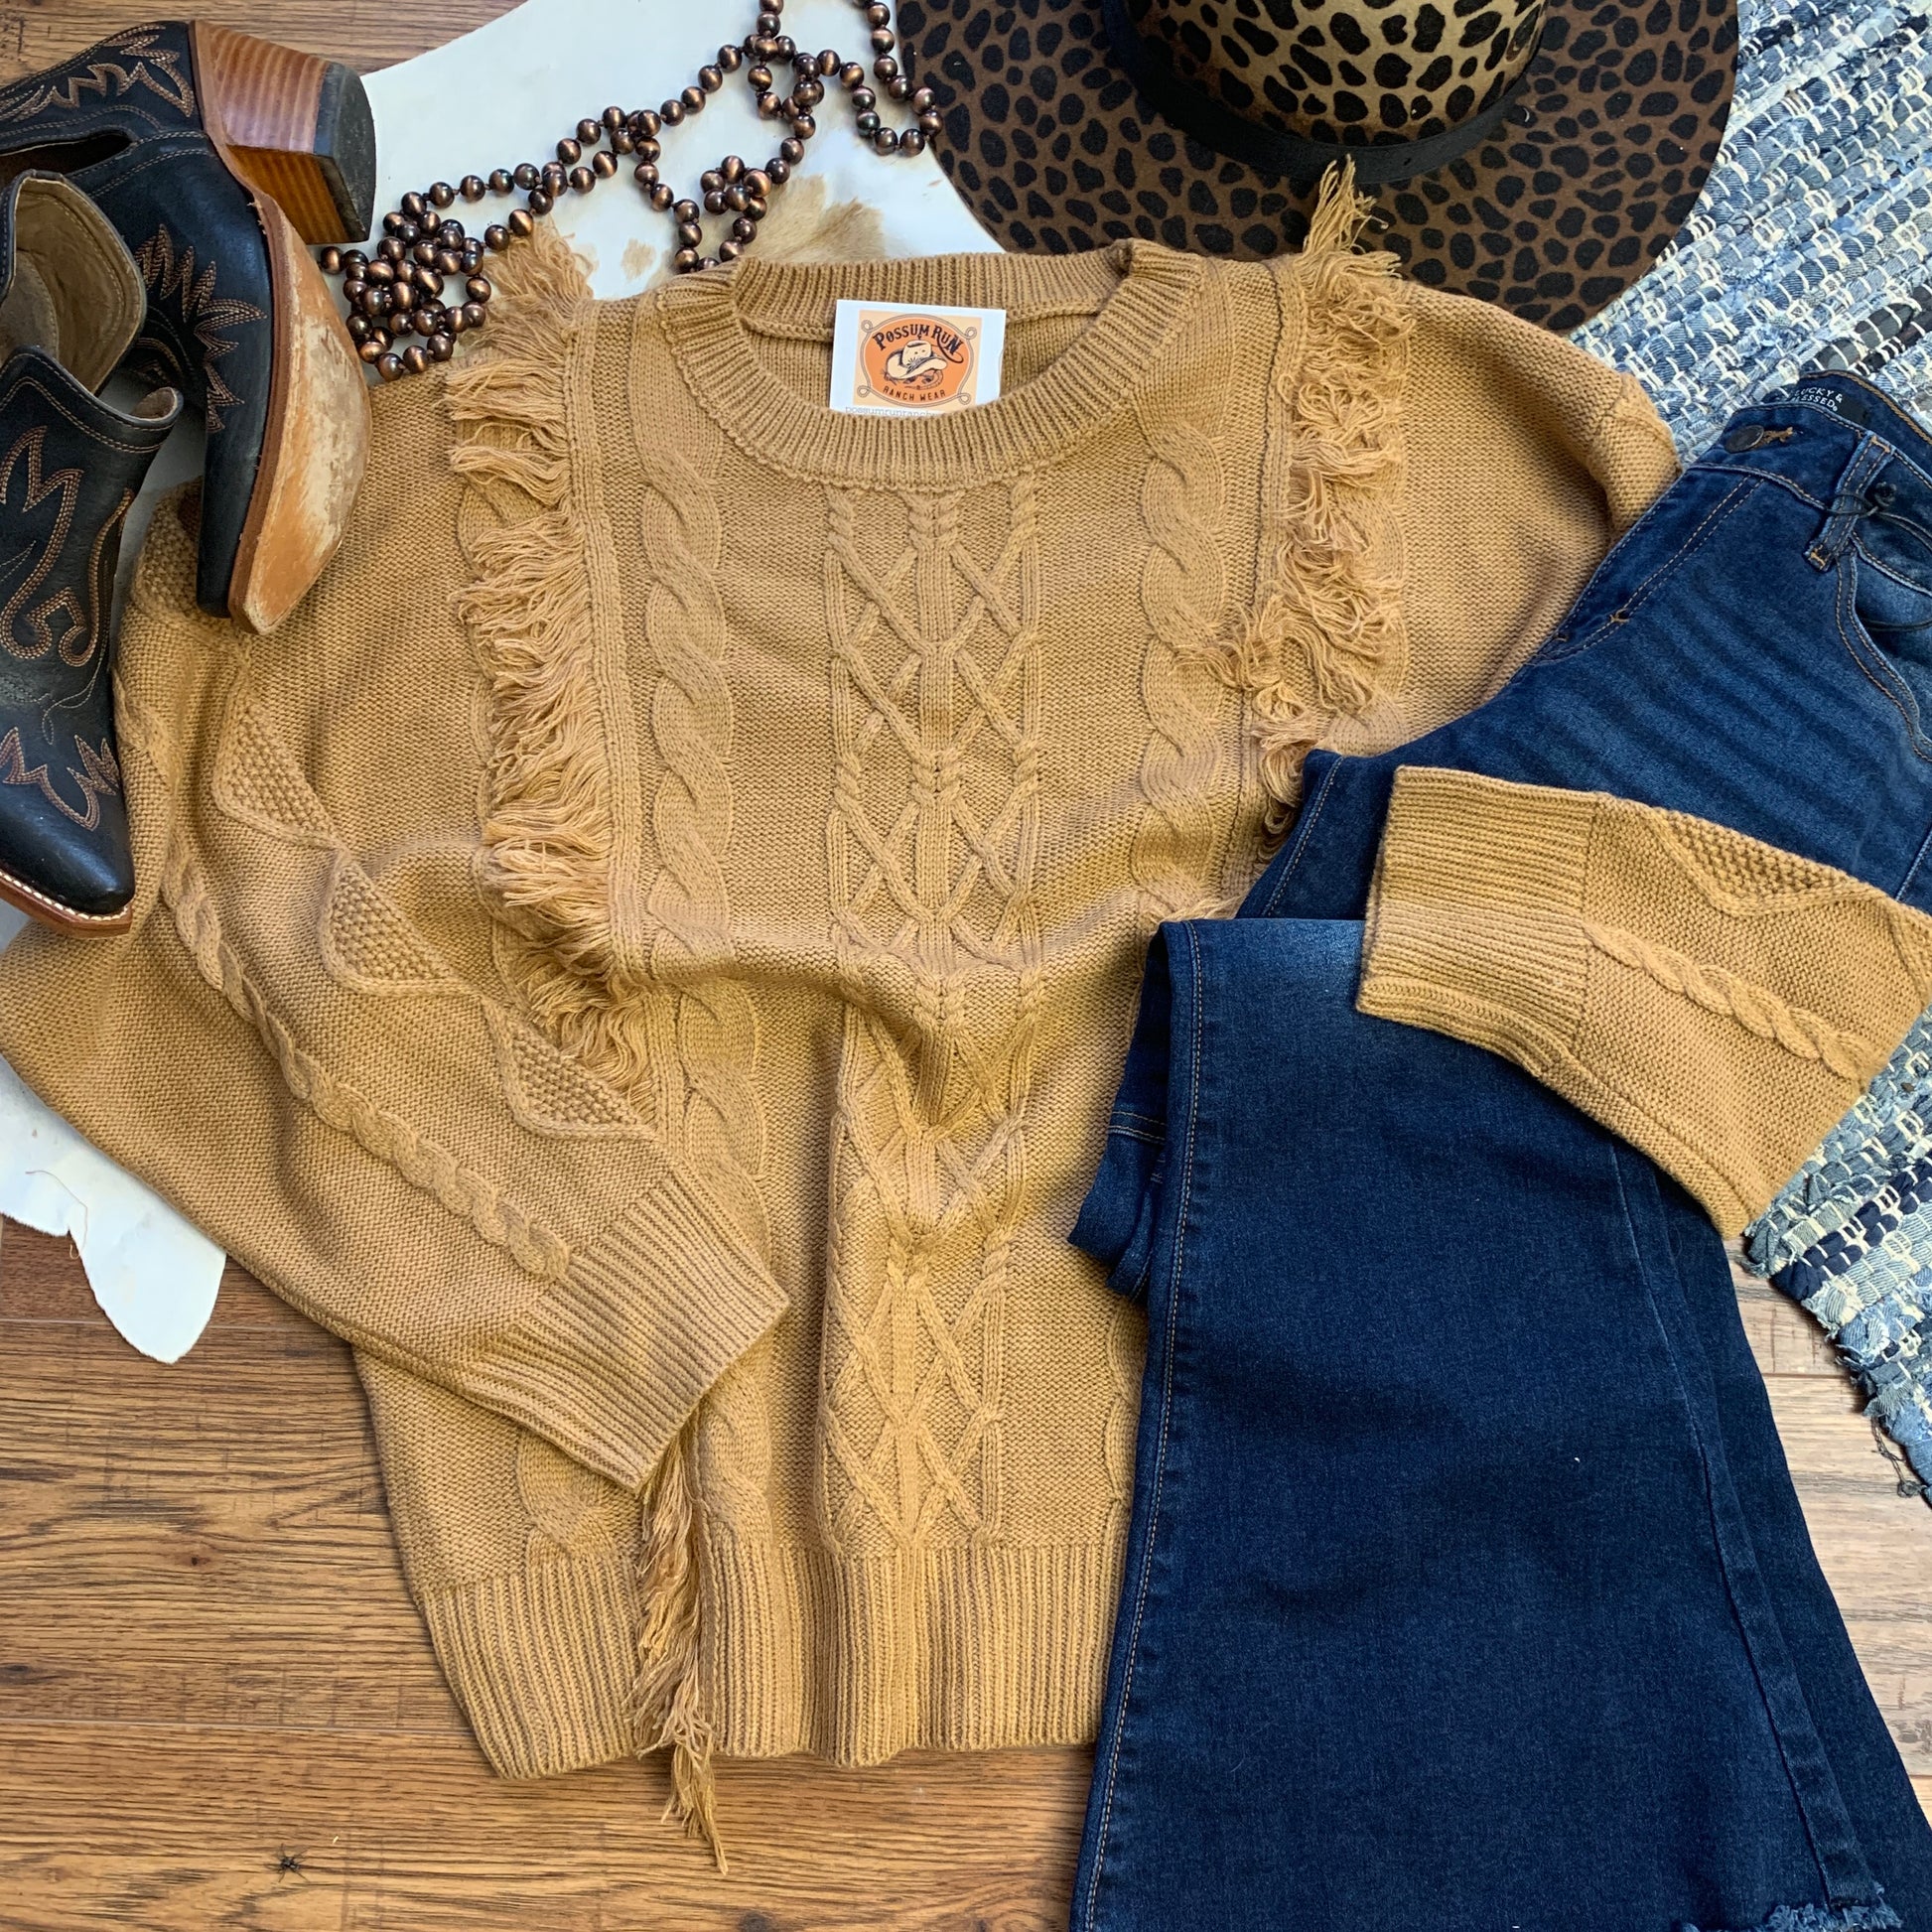 camel/ tan knit sweater with vertical fringe on it, paired with jeans and shoes.